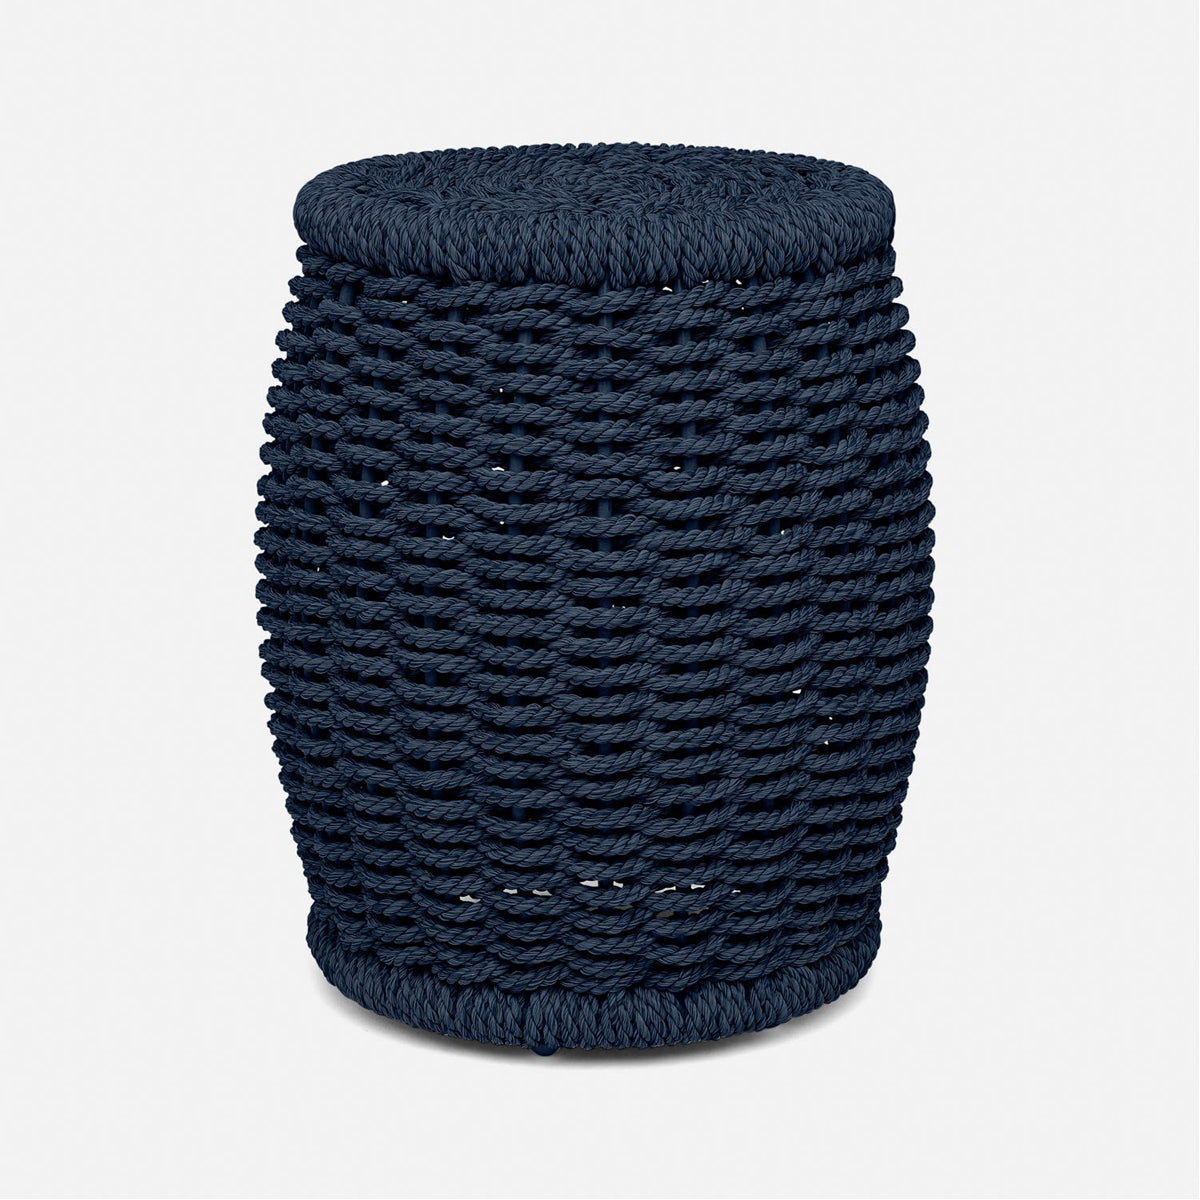 Made Goods Arla Faux Rope Outdoor Stool